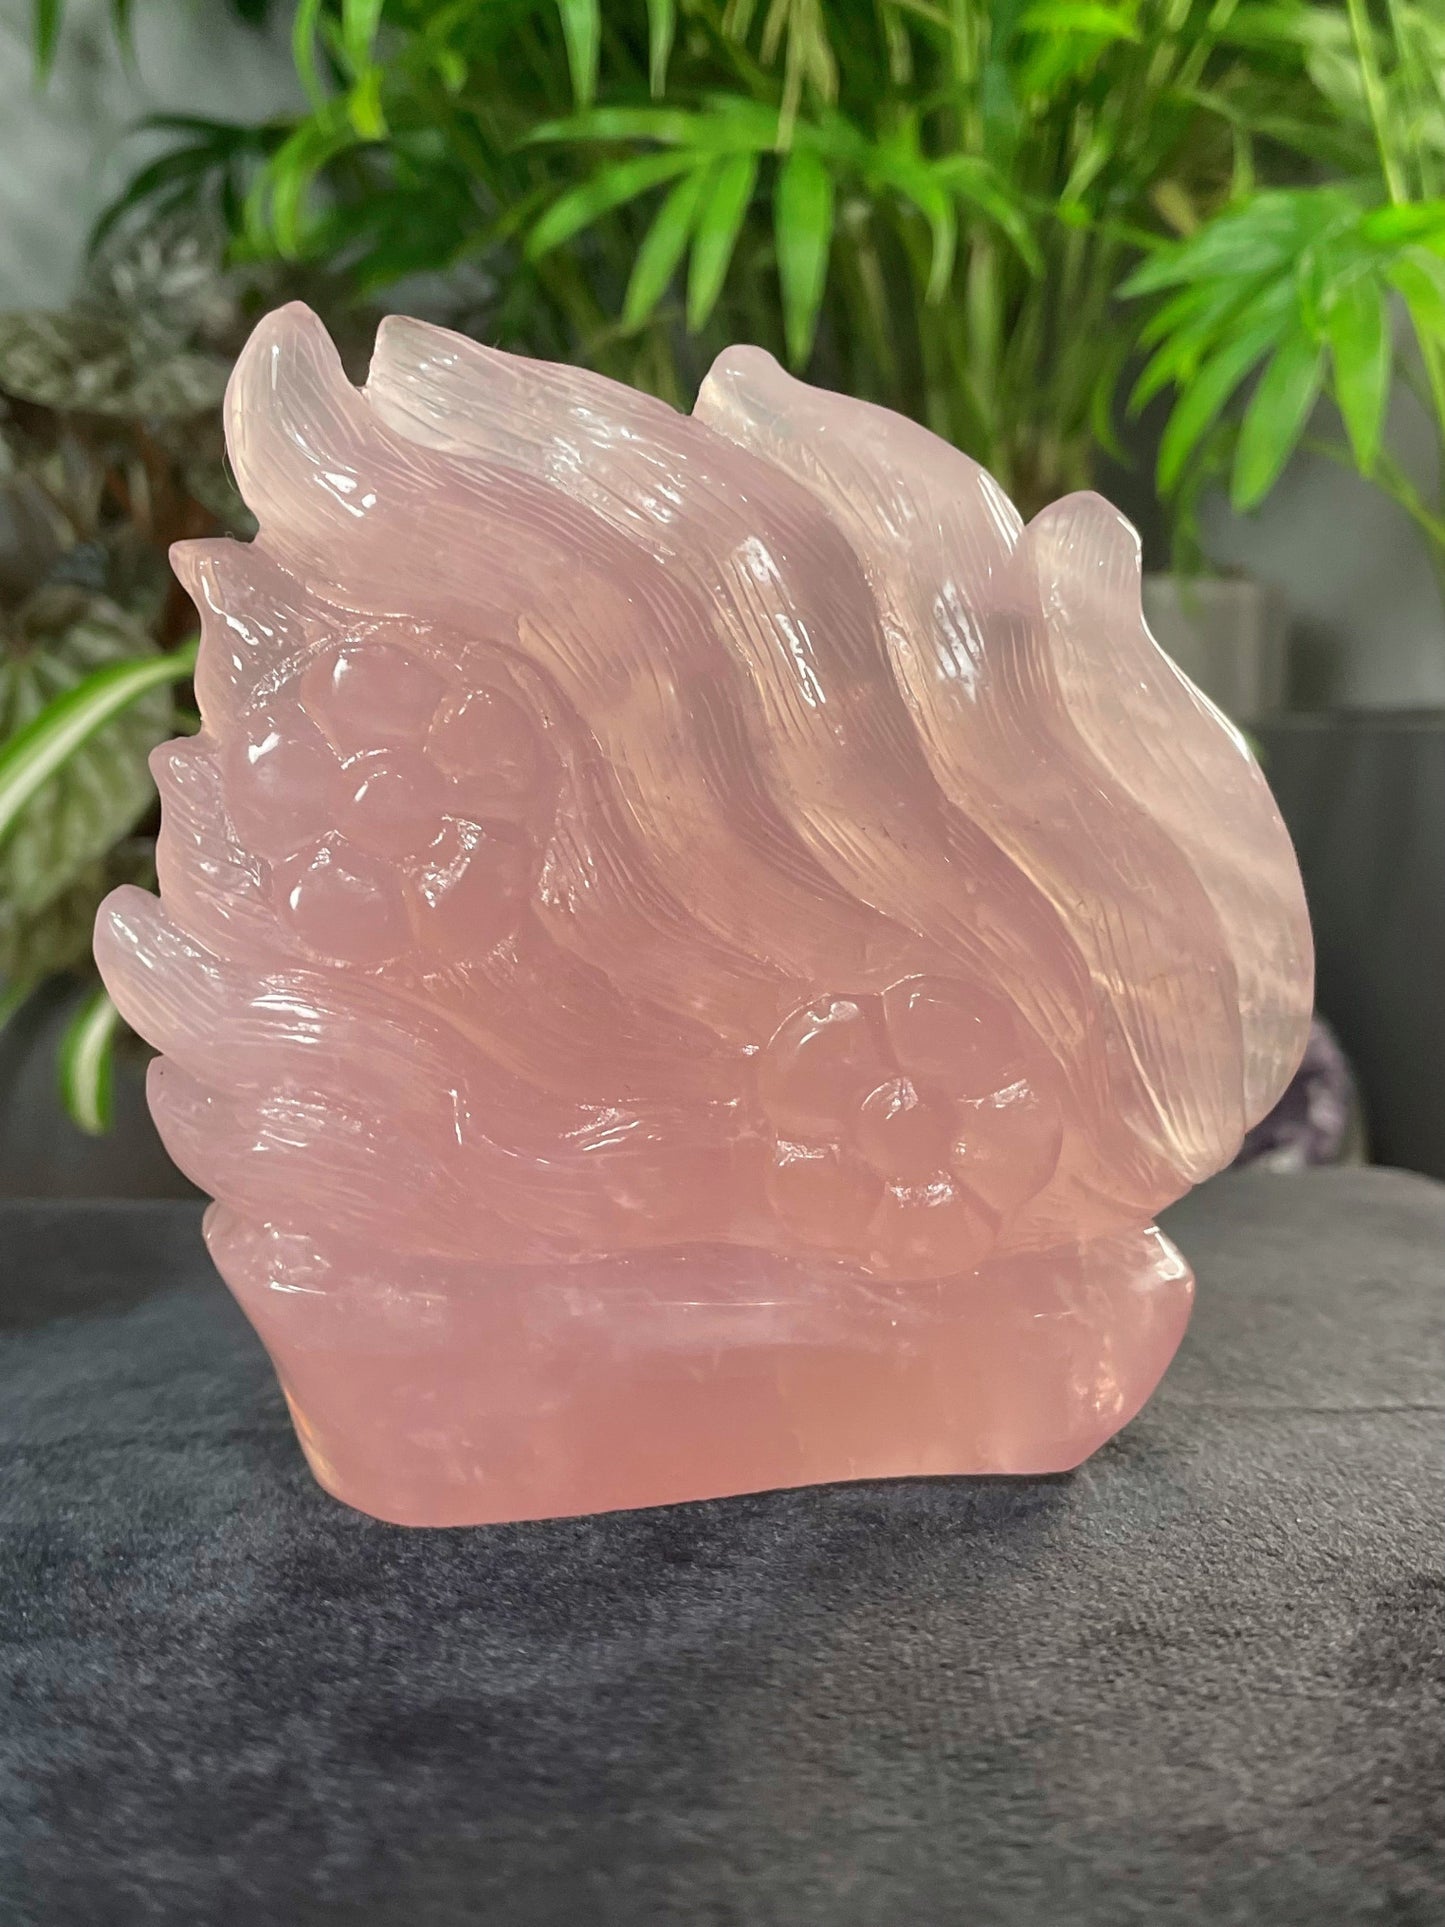 Pictured is a nine-tailed fox carved out of rose quartz.